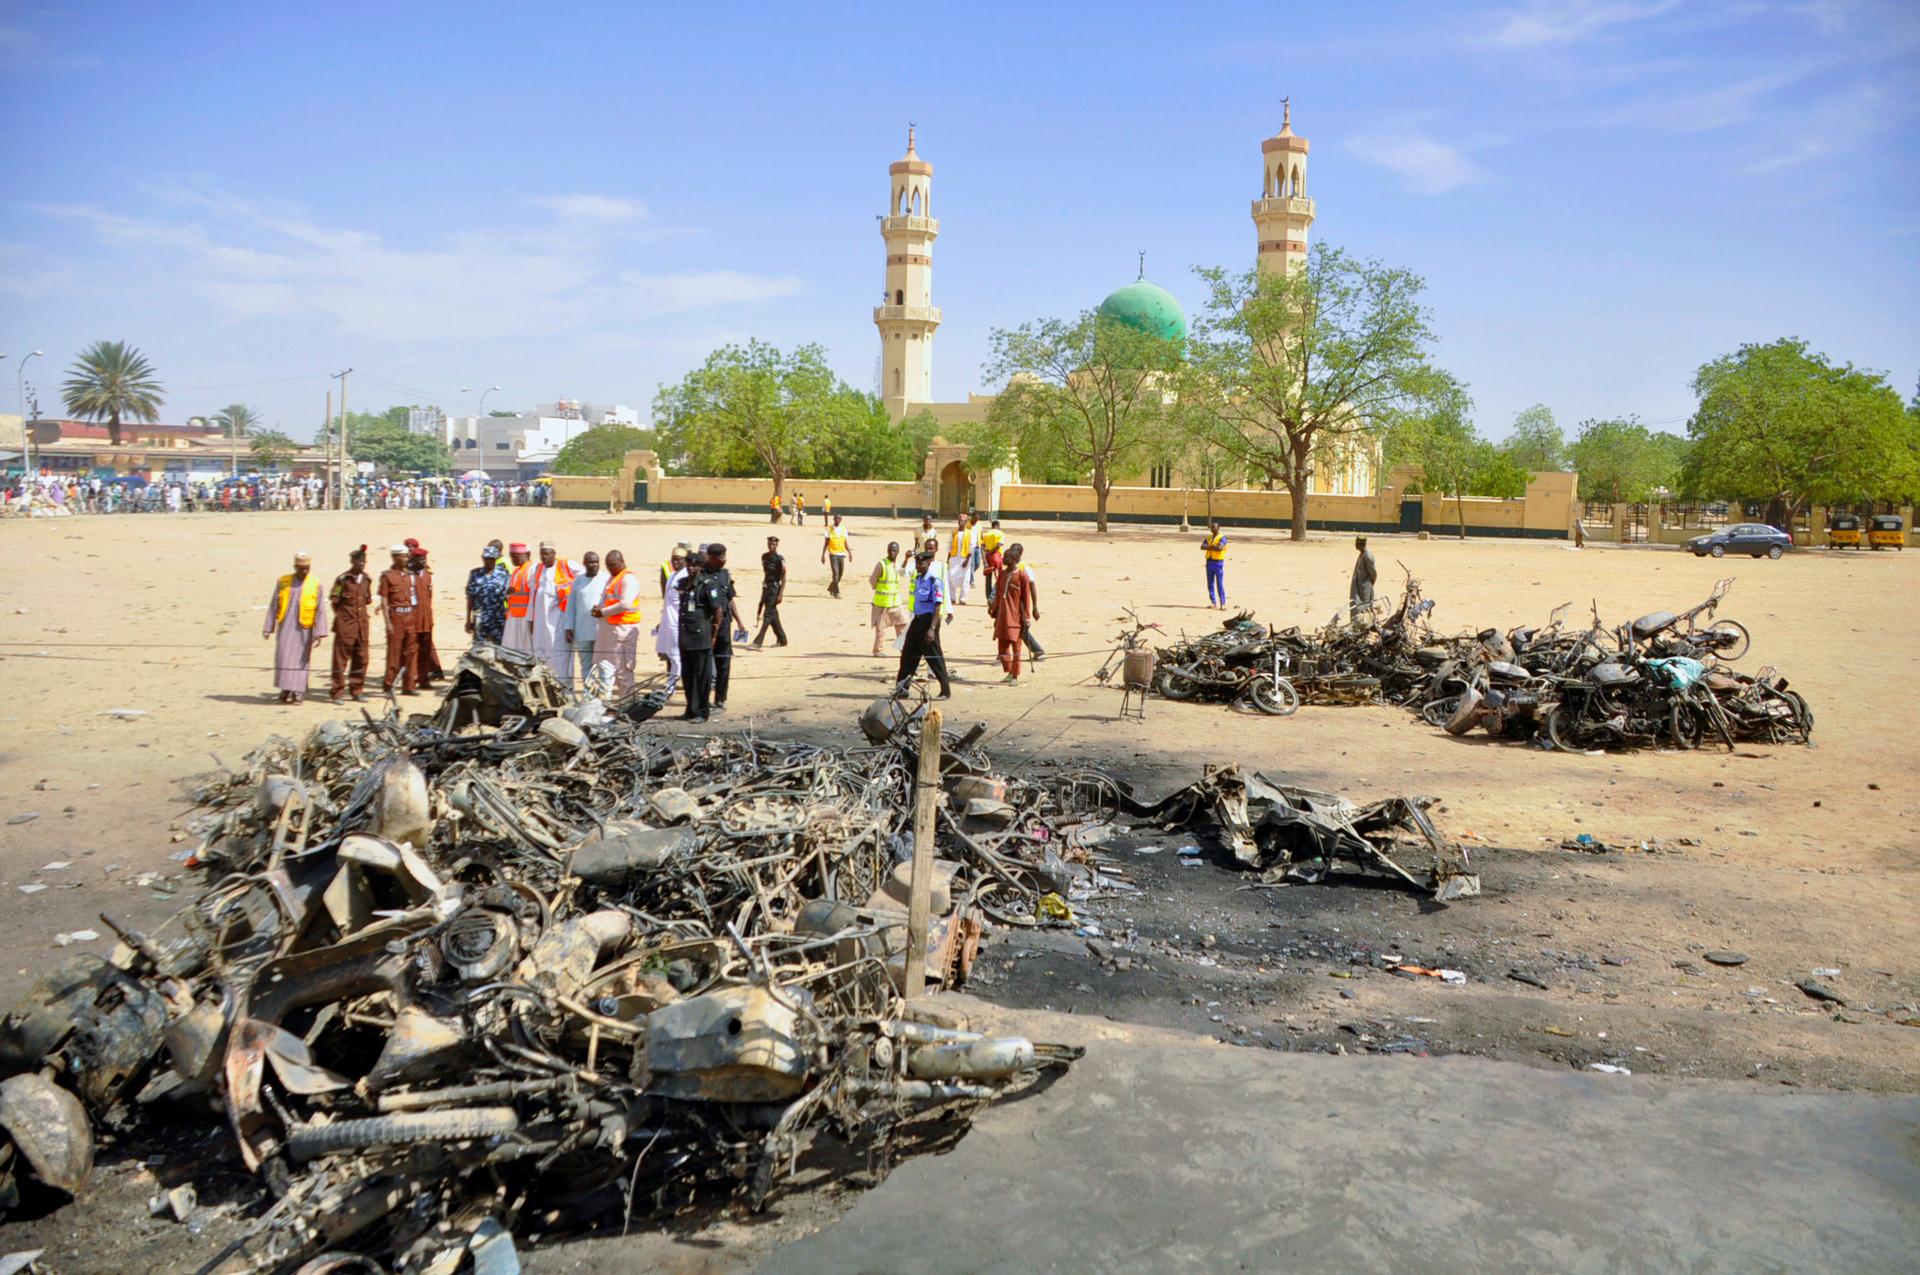 Police and emergency workers investigate a bombing scene in Kano, Nigeris, on November 29, 2014.